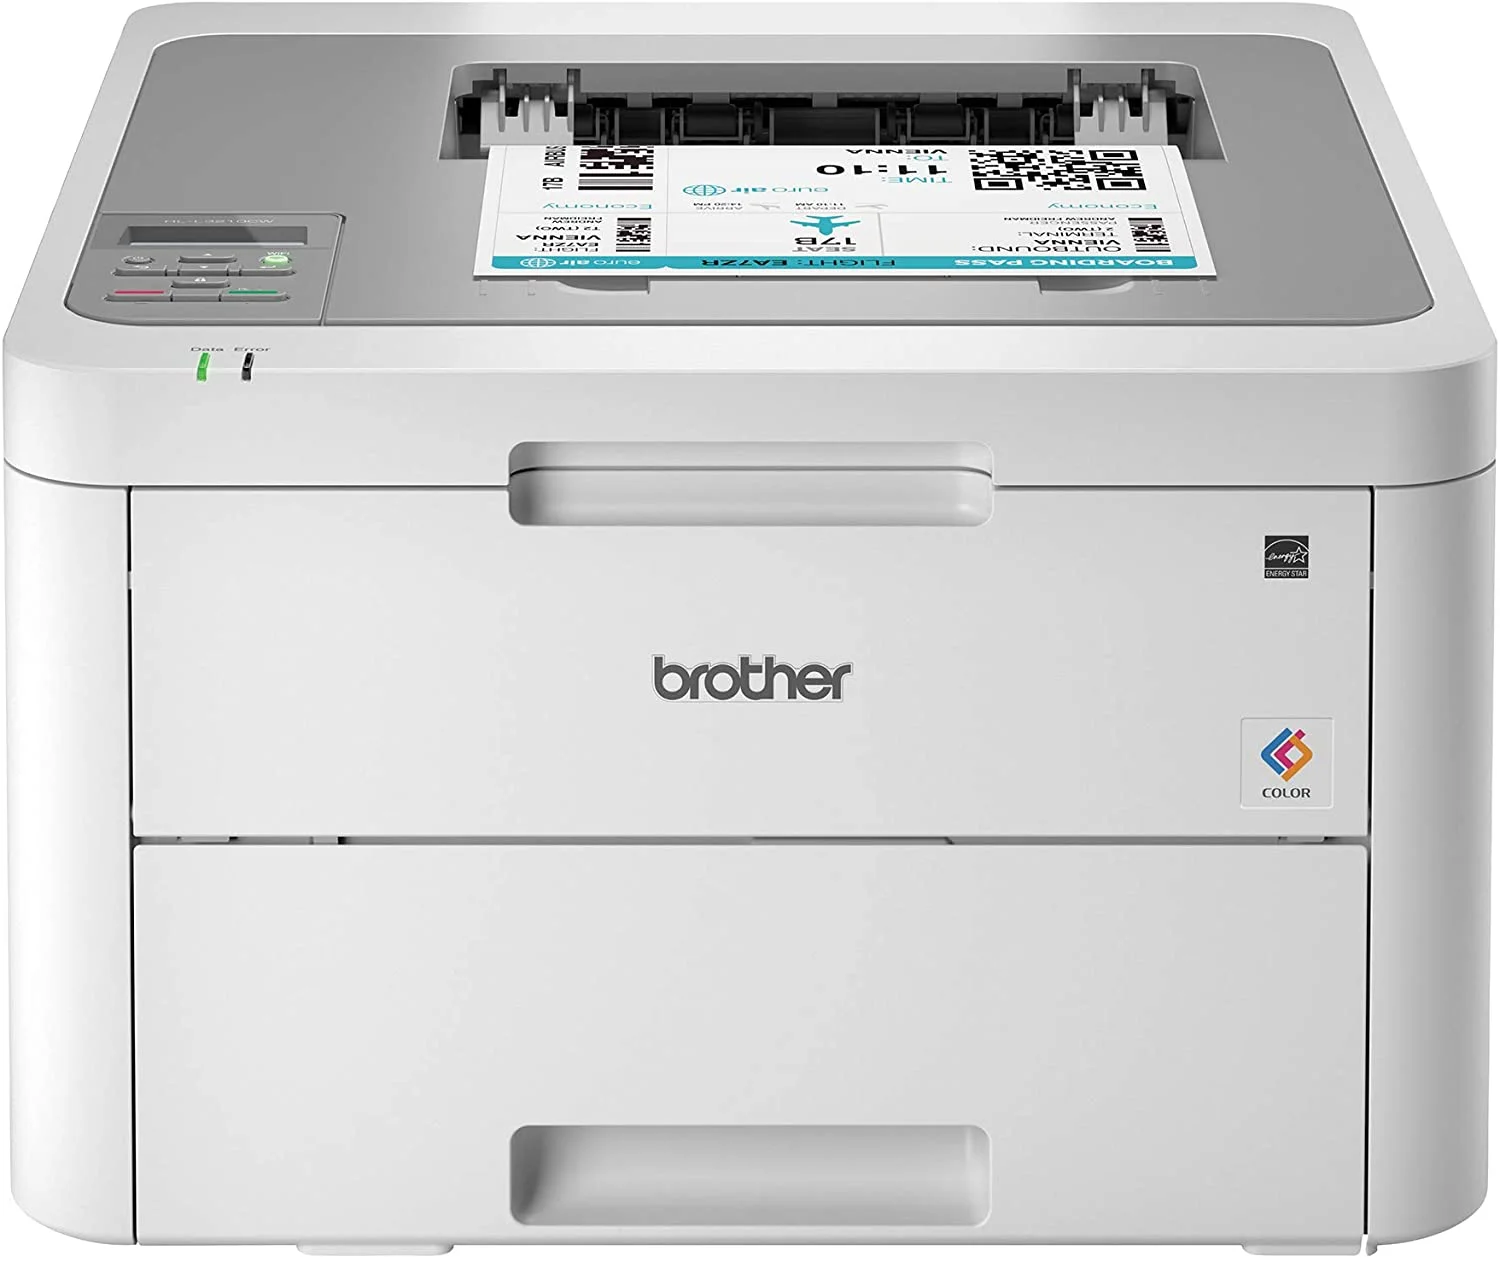 best printer for occasional use